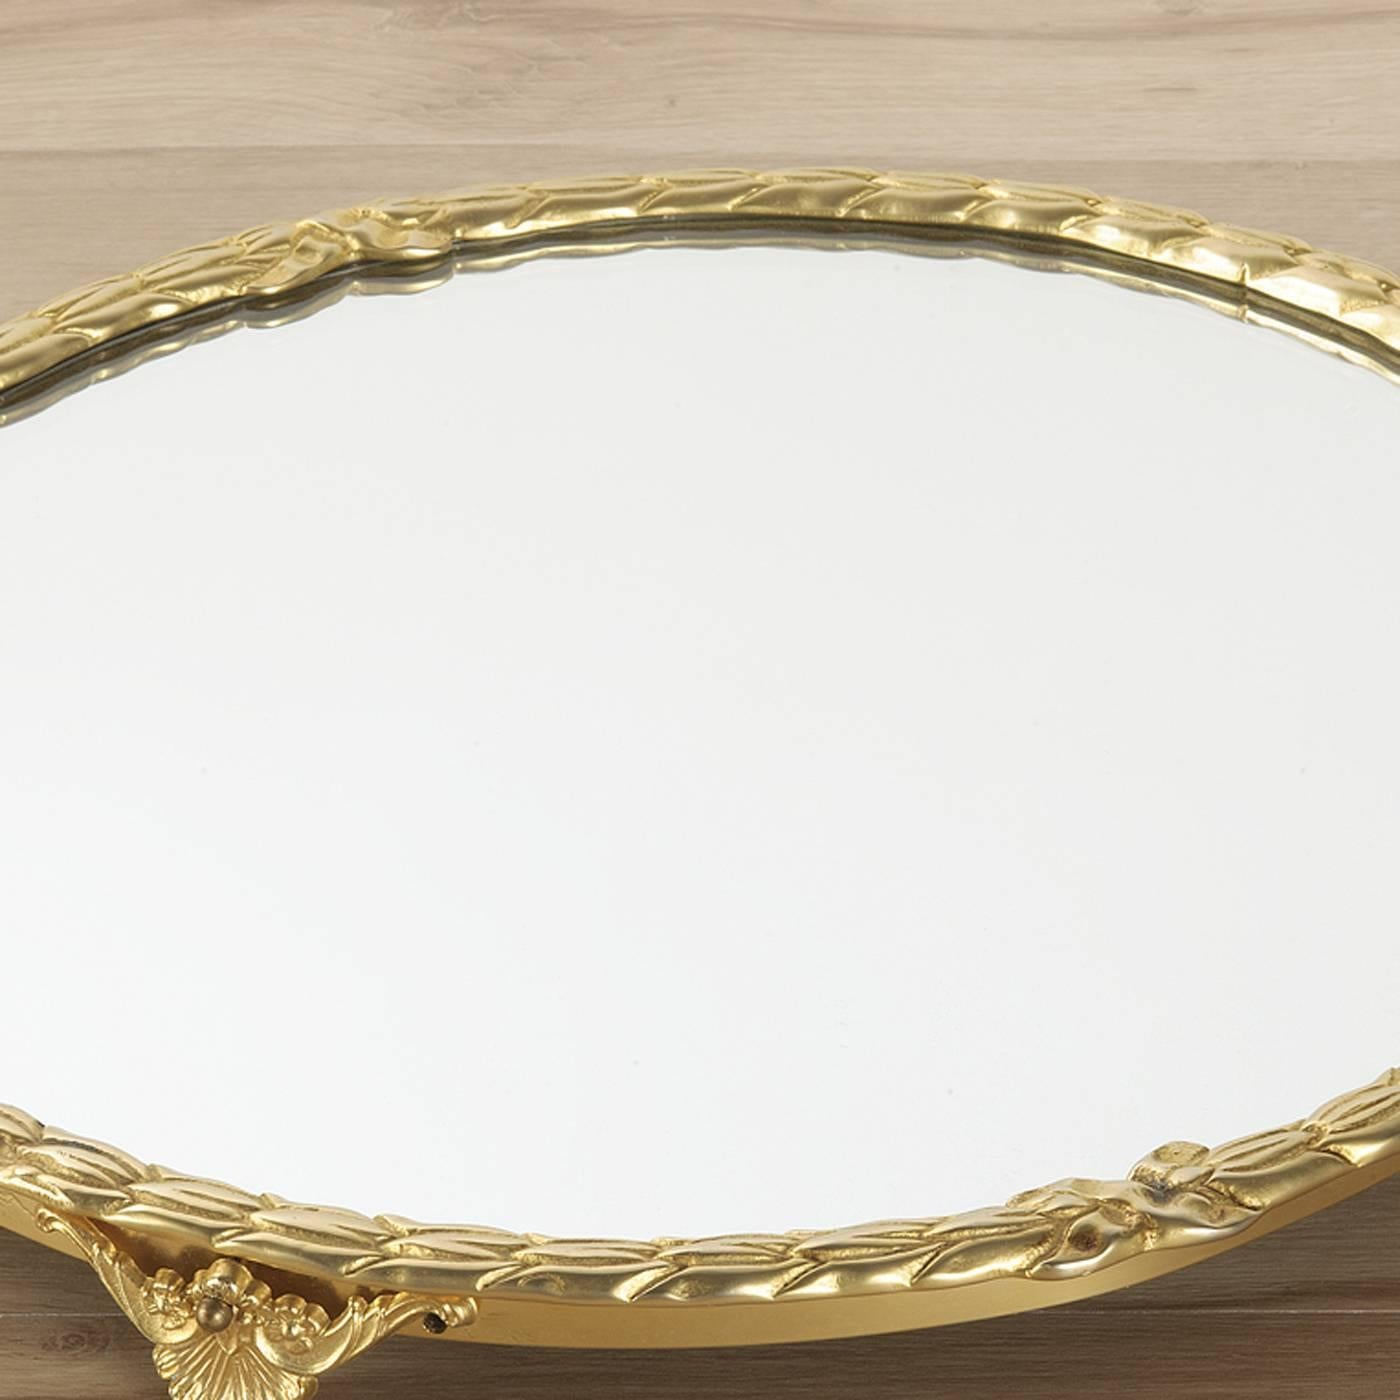 This exquisite tray features a mirrored top that will create striking effects with the surrounding light and with the objects displayed or served on it. Its delicate frame is made in bronze with a satin gold finish that also makes the two small